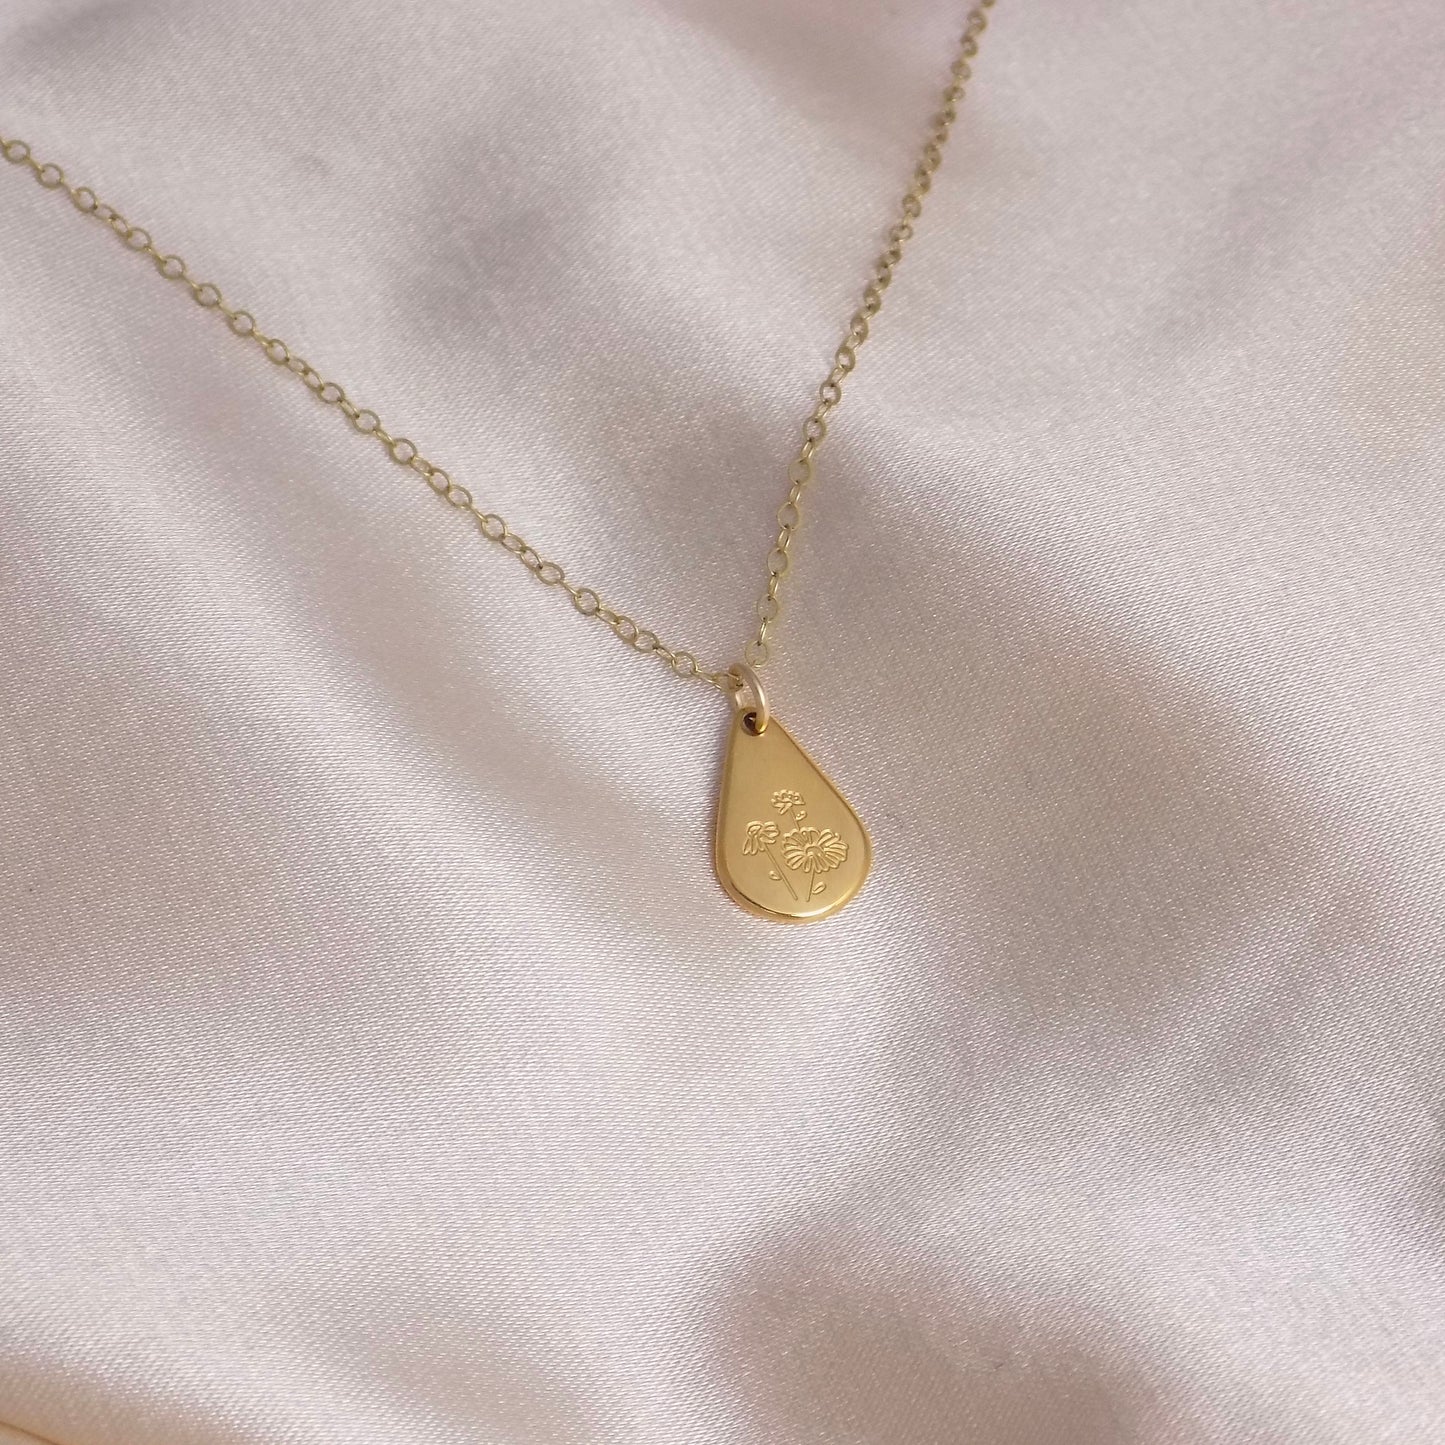 Birth Flower Necklace Gold, Teardrop Birth Flower Charm, Minimalist Layer, Personalized Gift For Her, M6-723